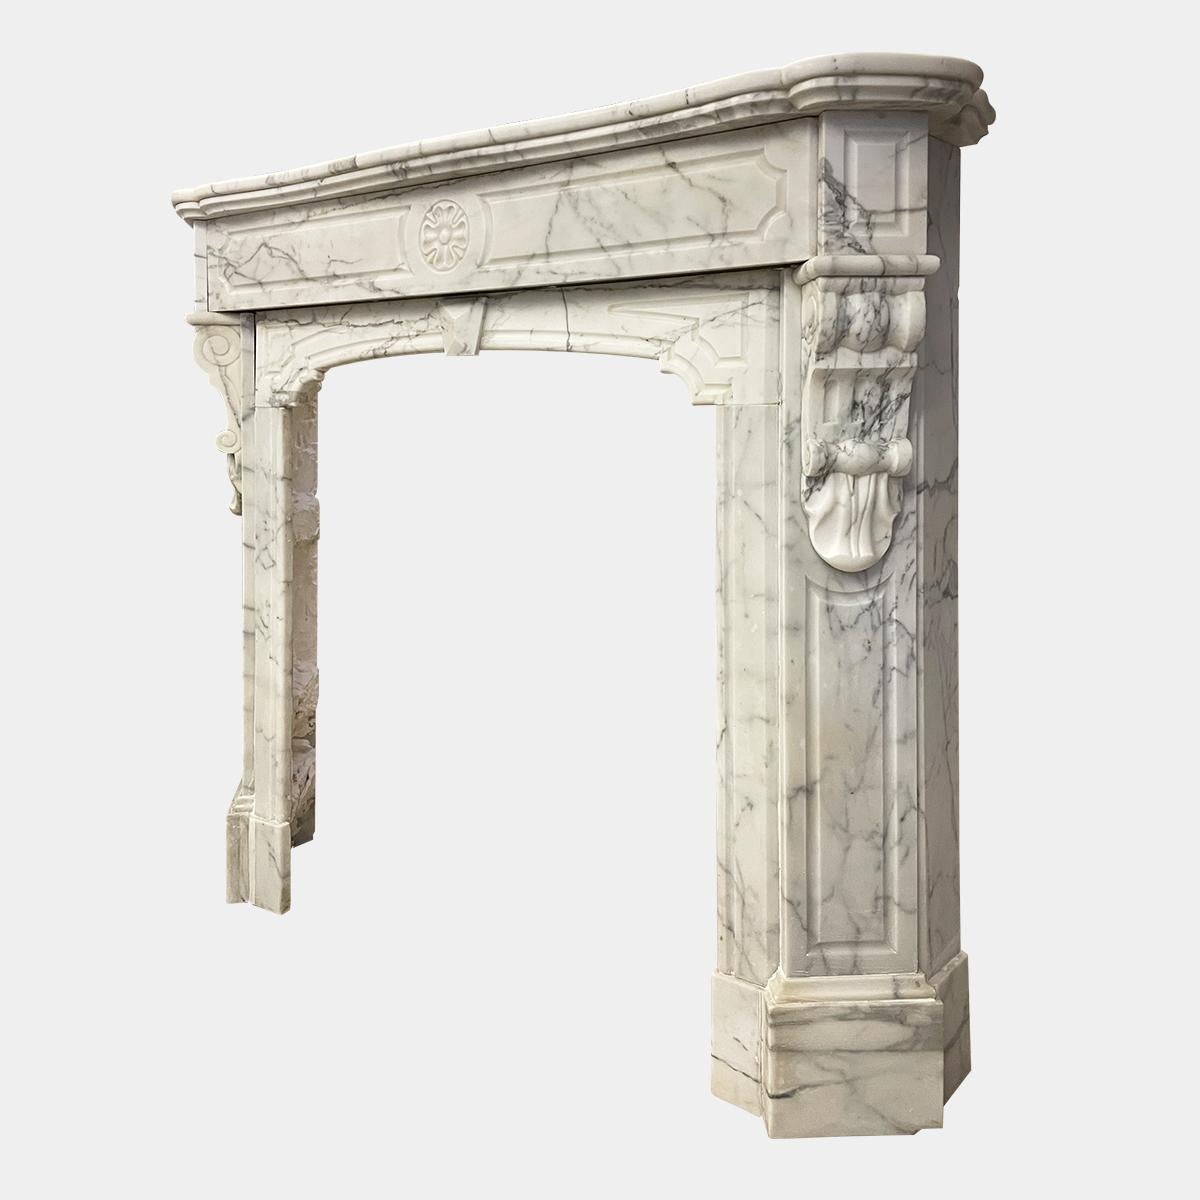 A late 19th c French fireplace in Arabescato marble, a serpentine shelf with panelled frieze below, the centre with carved floral motif. The cantered Jambs with corbeled brackets and panelled end blocks. The interior with a shaped arch 

Opening